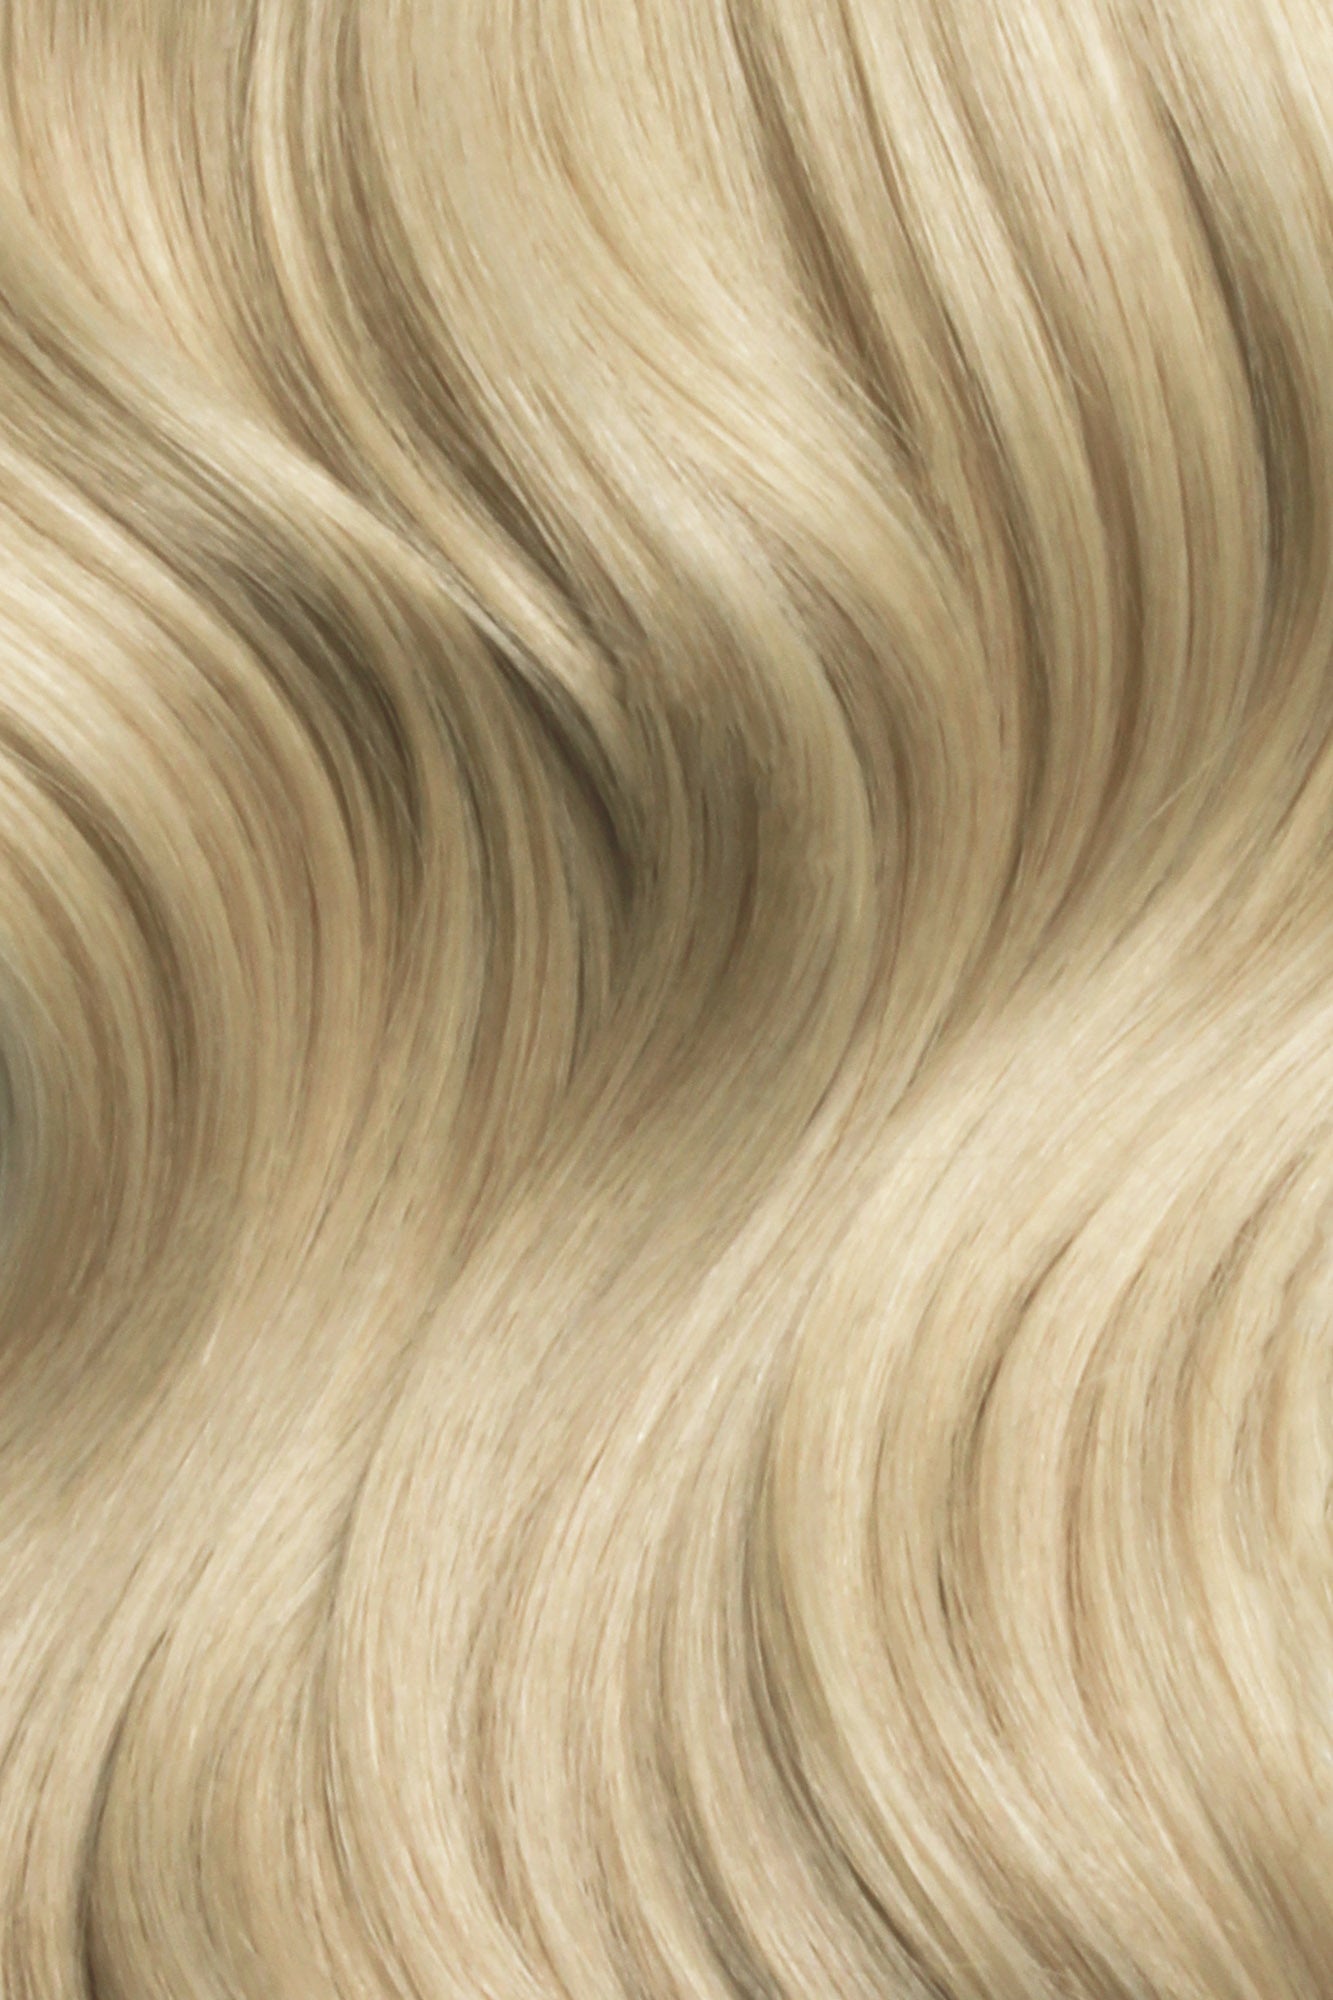 Nano Bonds 22 Inches - SWAY Hair Extensions Silver-Ash-Blonde-60A-Silver Ultra-fine, invisible bonds for a flawless, natural look. 100% Remy Human hair, lightweight and versatile. Reusable and perfect for individual or salon use.